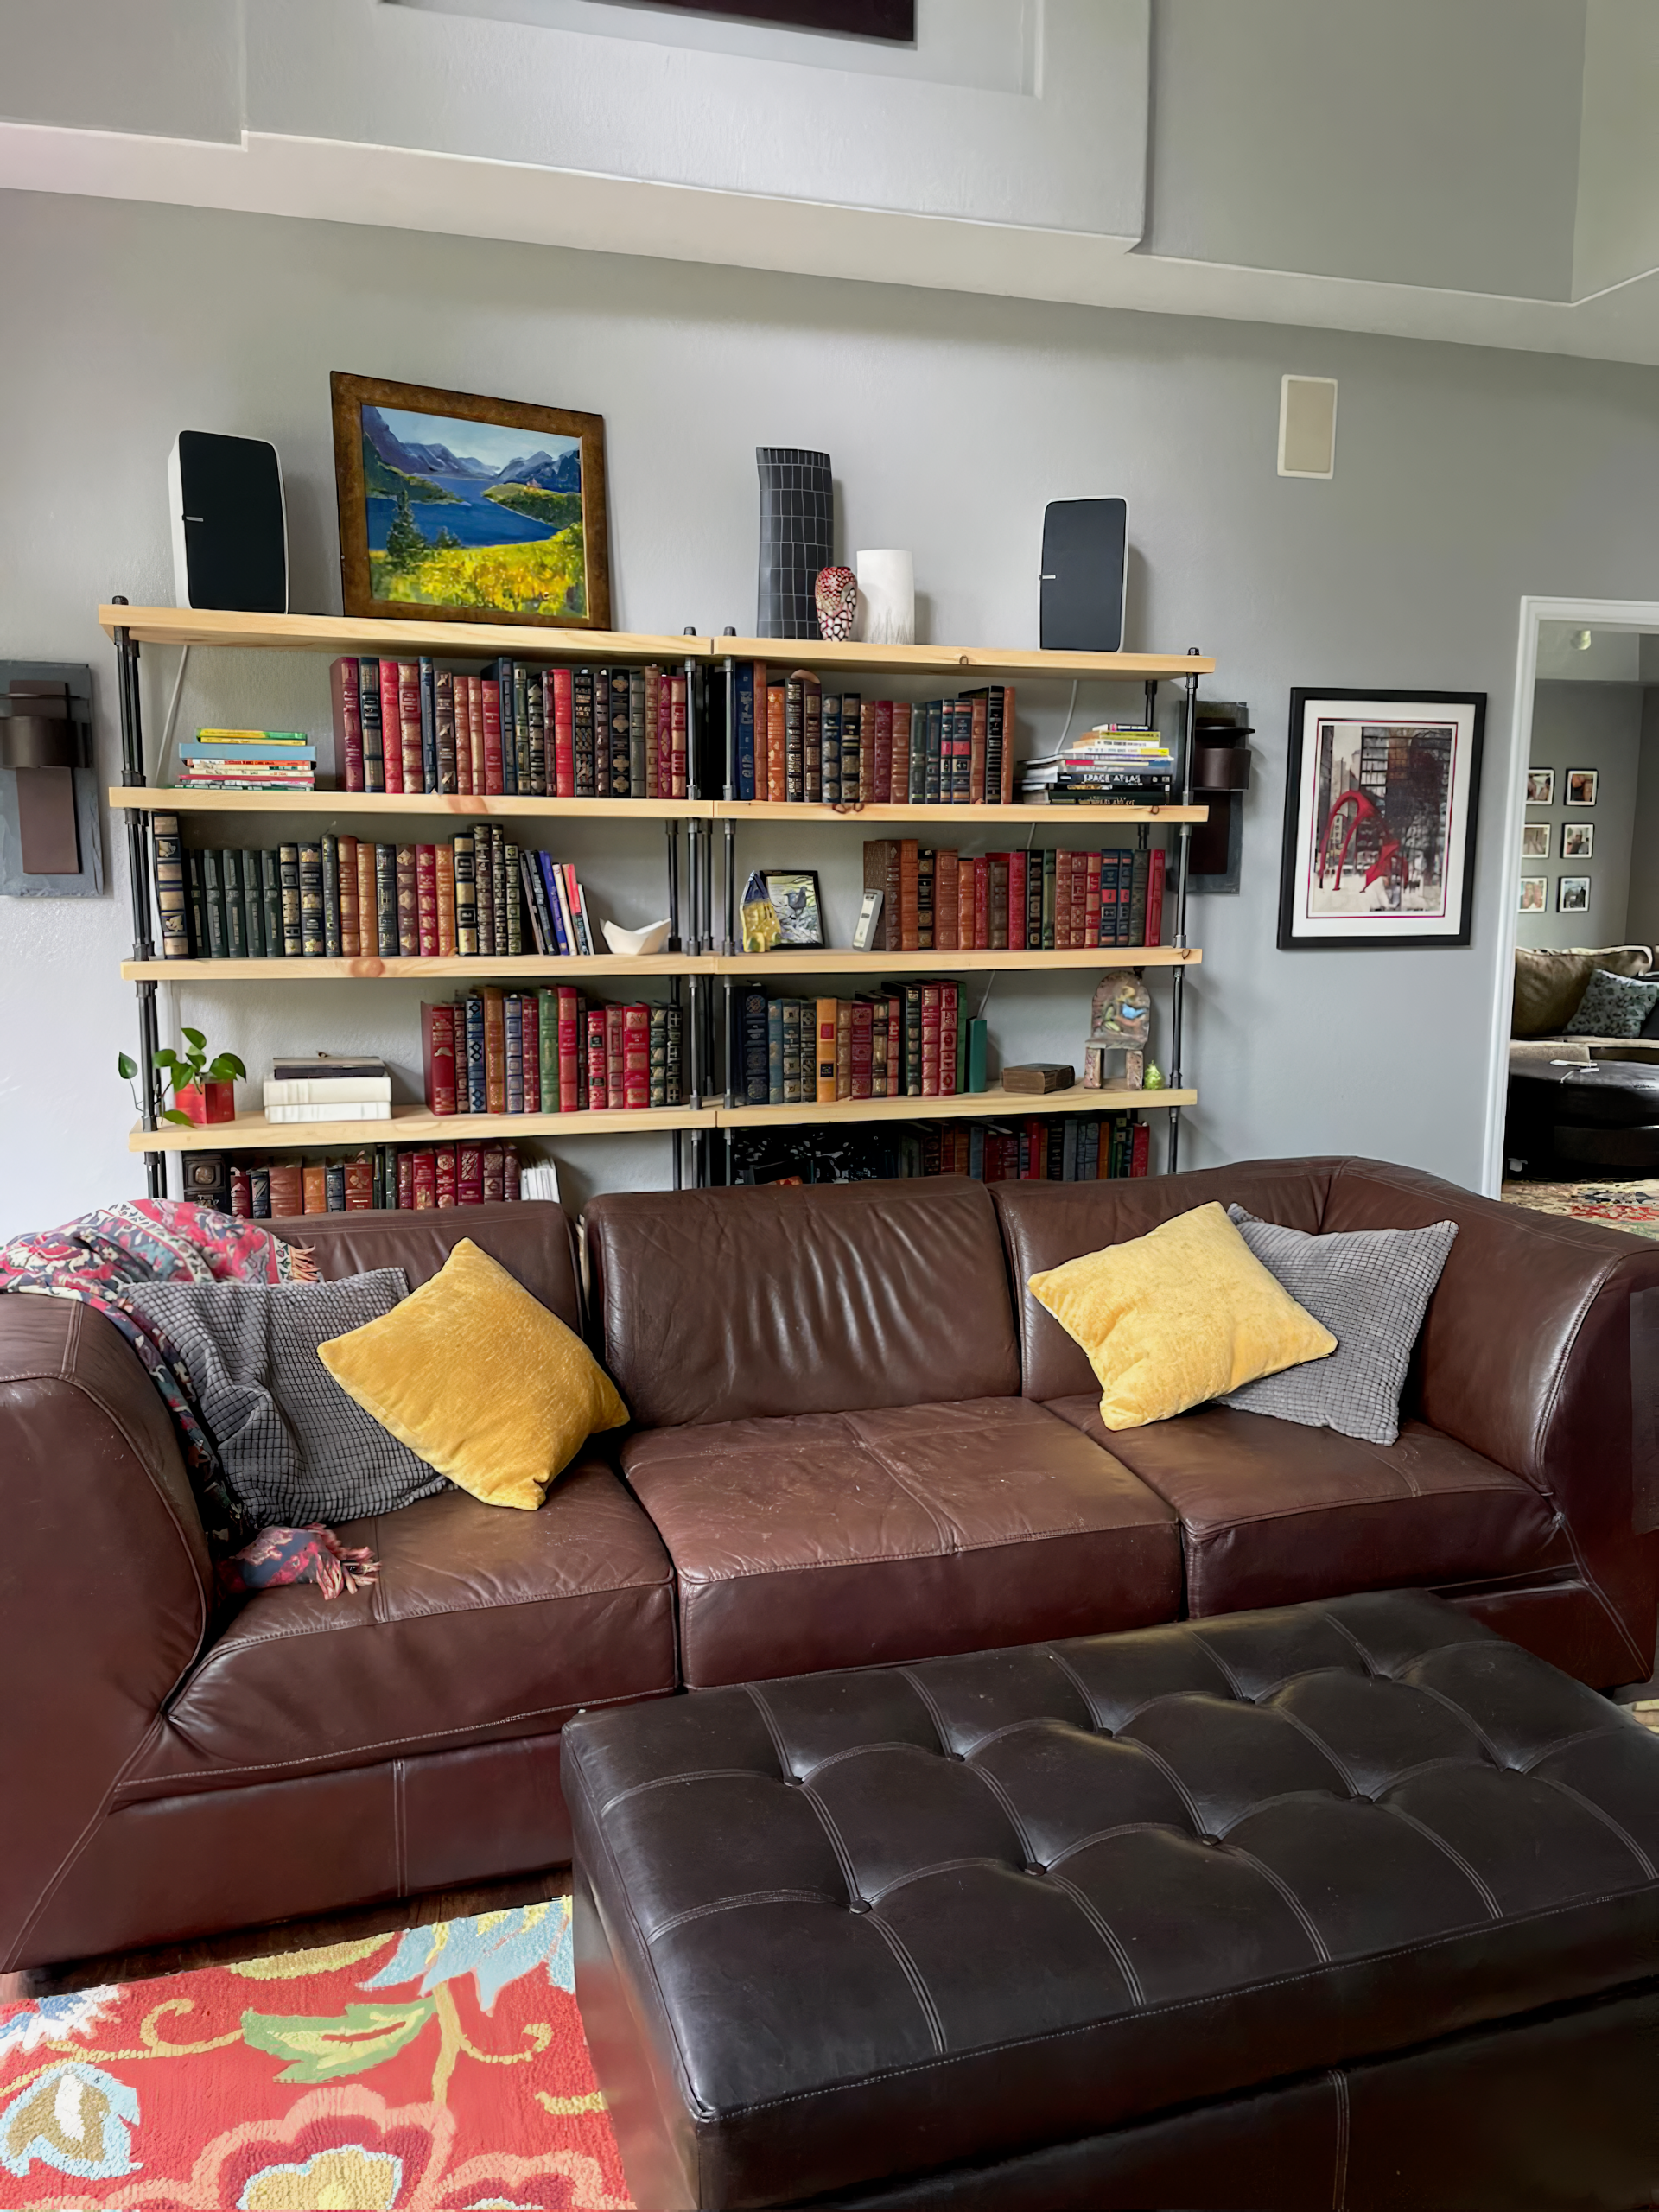 Idustrial famrhouse bookcase in large living room, book shelves are side by side for ease of storage and hold many tall heavy books. Bookcases sit behind a red leather couch that has cozy golden yellow pillows. Handmade wooden shelving units are the statement piece of the room design.